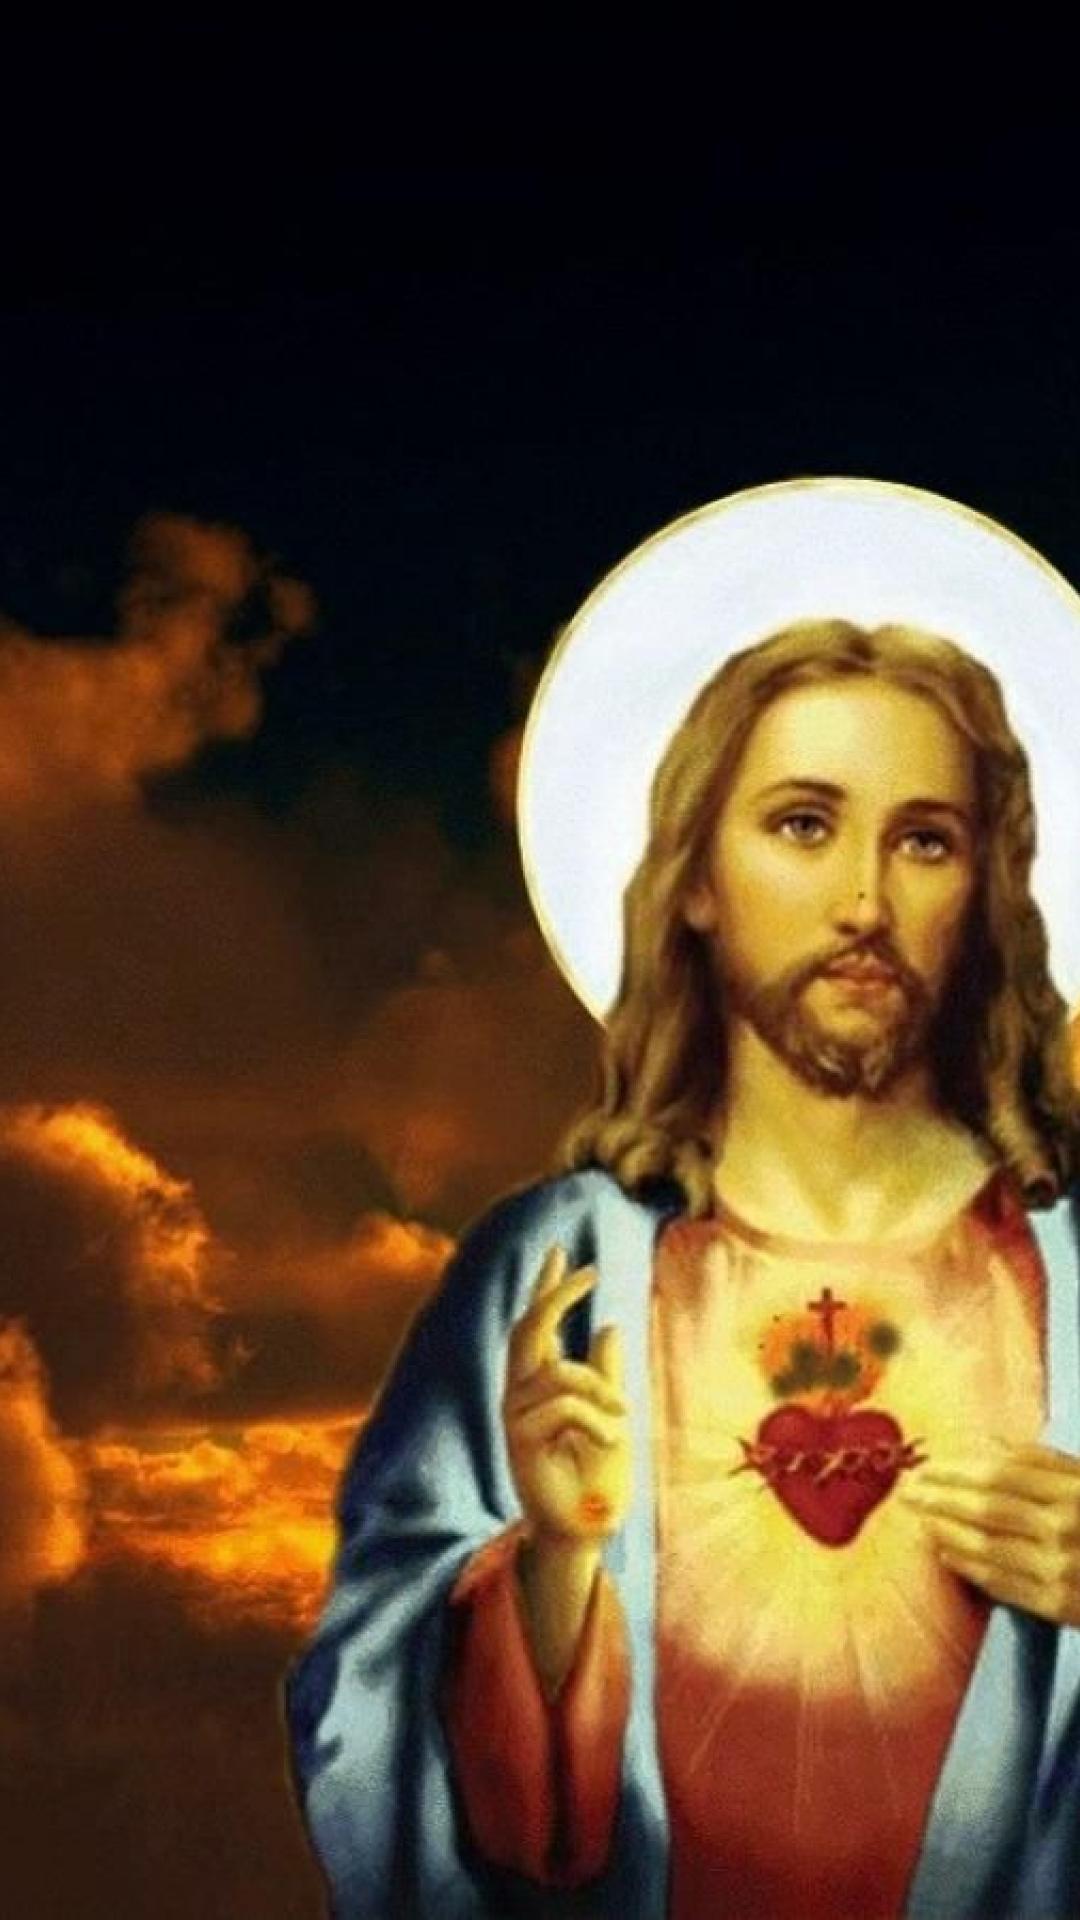 Jesus HD Wallpaper iPhone, image collections of wallpaper